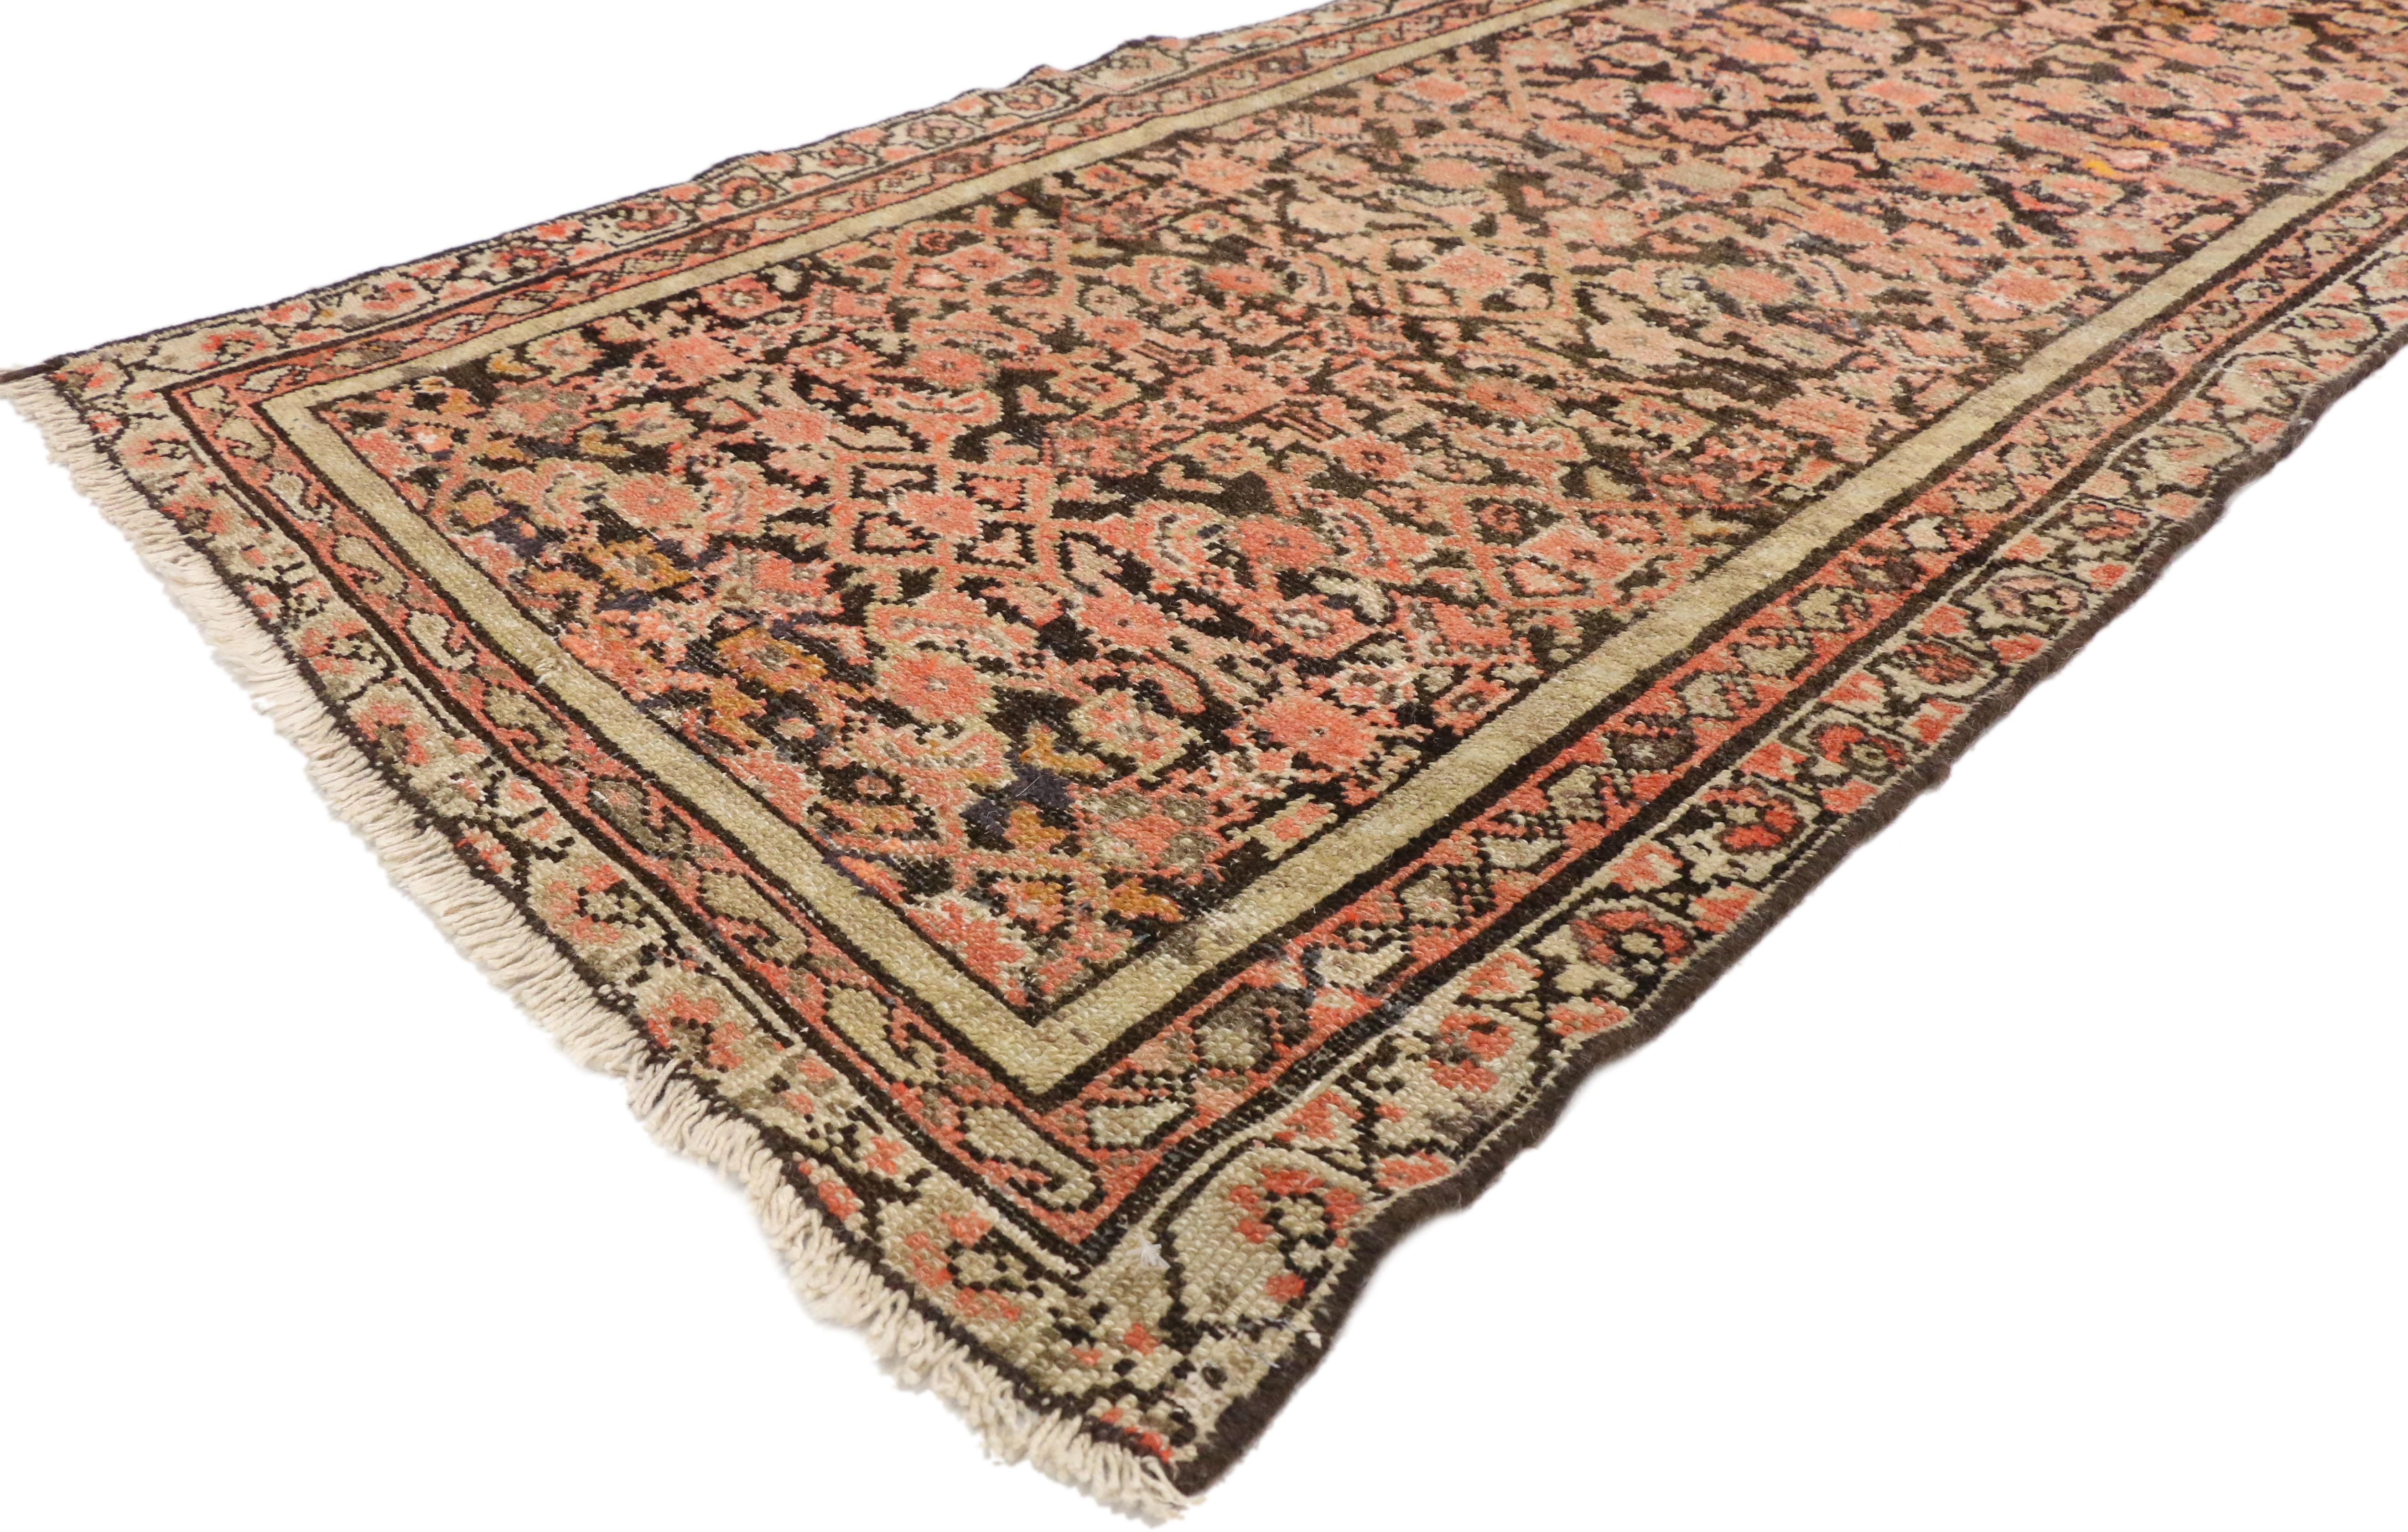 75342, antique Persian Hussainabad Hamadan runner, hallway runner. This hand knotted wool antique Persian Hussainabad Hamadan runner features a lively all-over Herati pattern that densely fills the field. A series of floral vine, boteh, and a